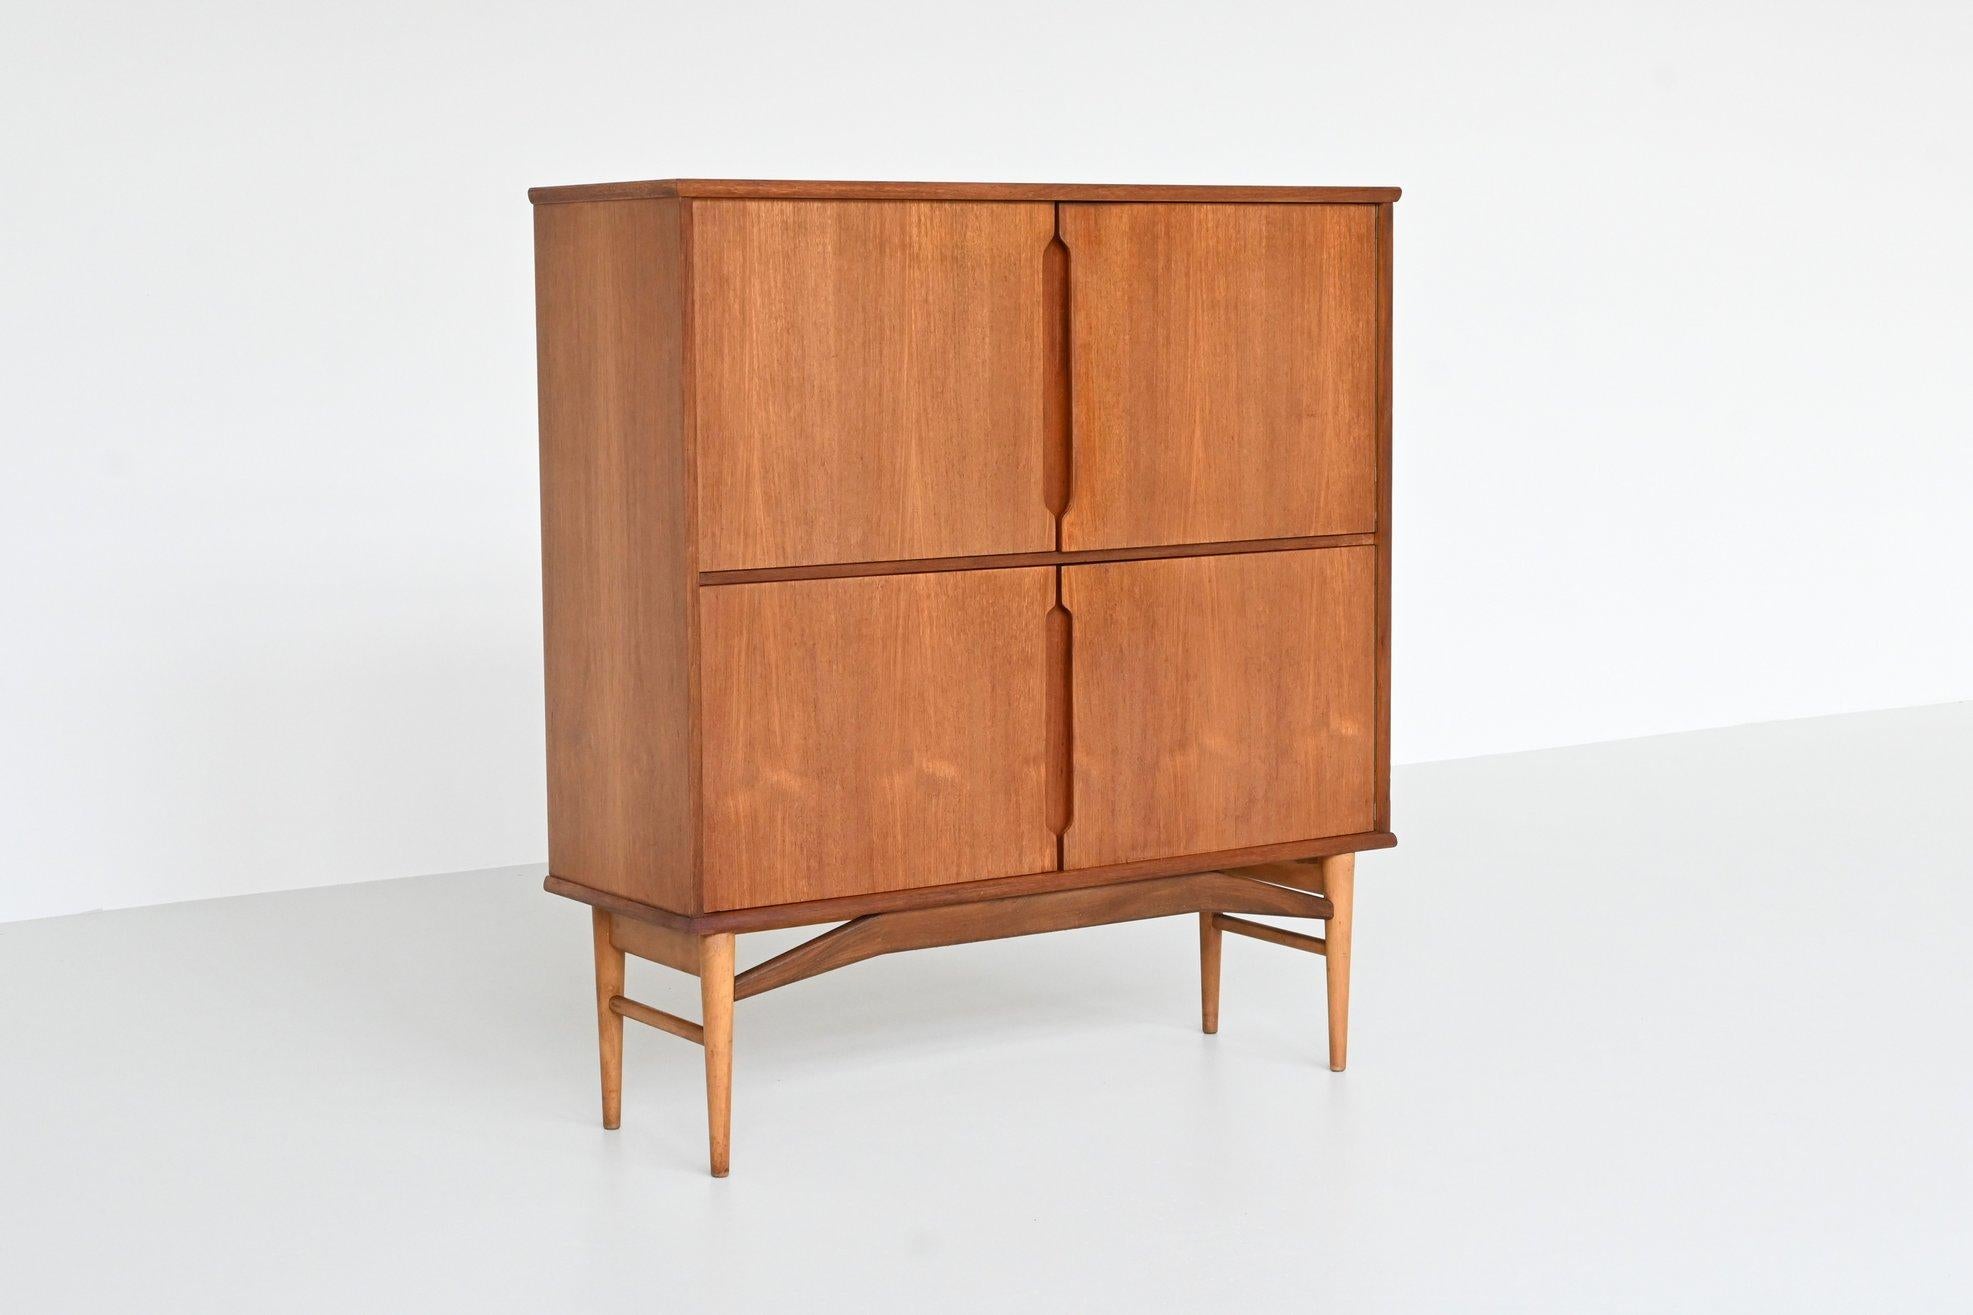 Wonderful Danish highboard designed by Borge Mogensen and manufactured by Fredericia Stolefabrik, Denmark 1960. This beautiful cabinet is made of veneered teak with solid beech legs. It has four doors with three shelves behind and offers plenty of